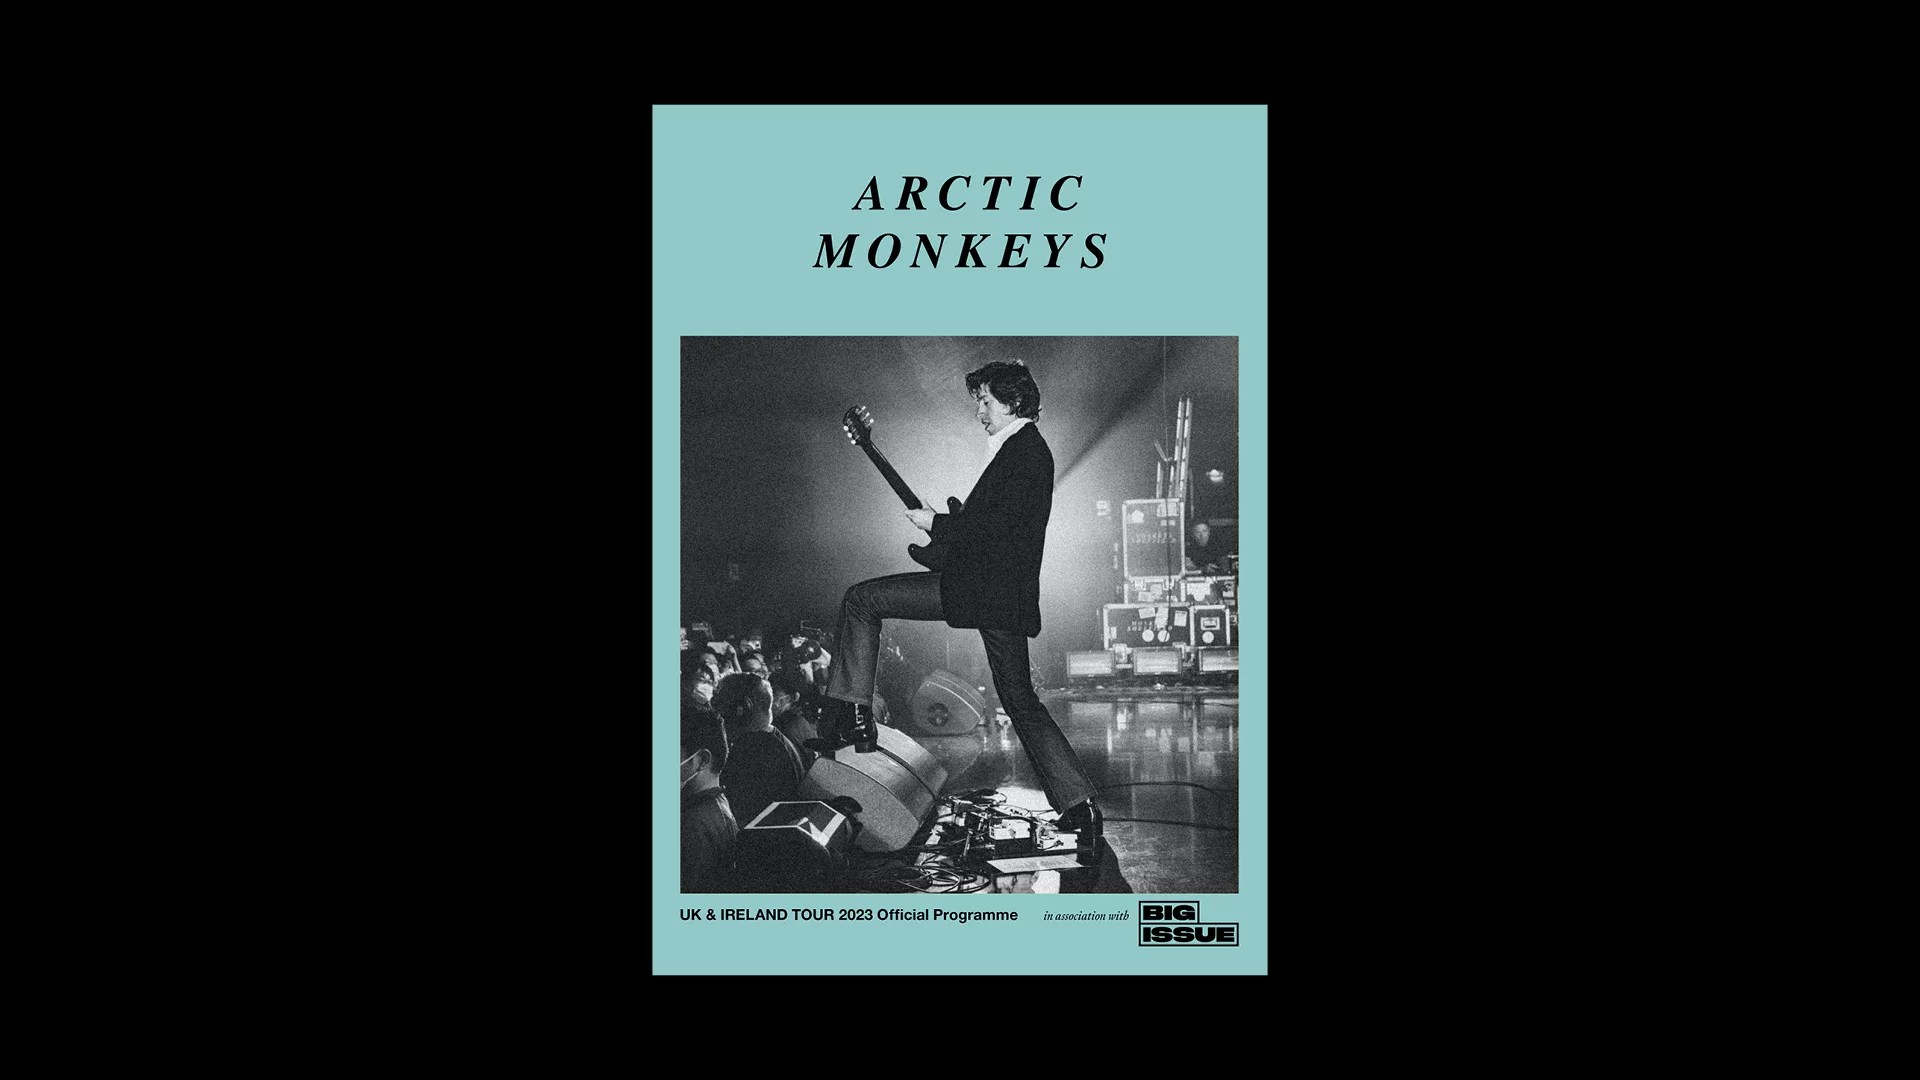 Arctic Monkeys UK & Ireland Tour 2023 Official Programme in association with Big Issue